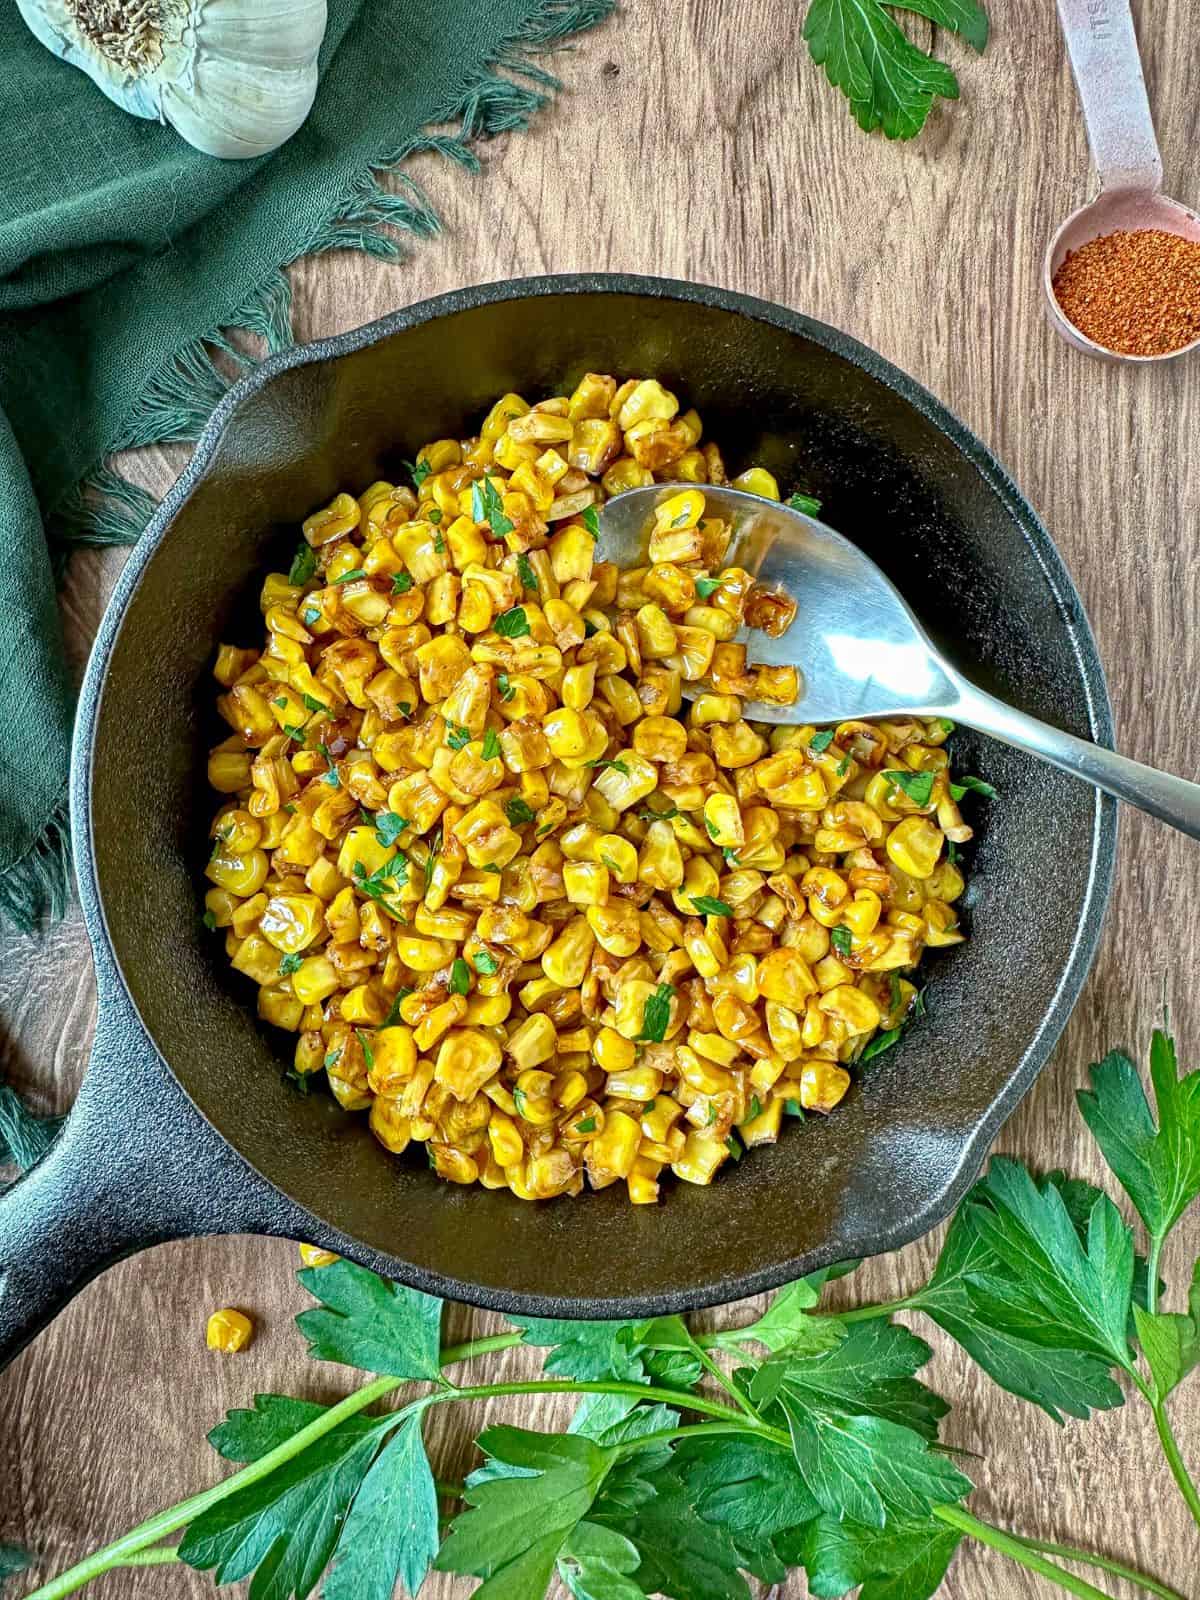 Charred corn in a cast iron skillet with a silver spoon.